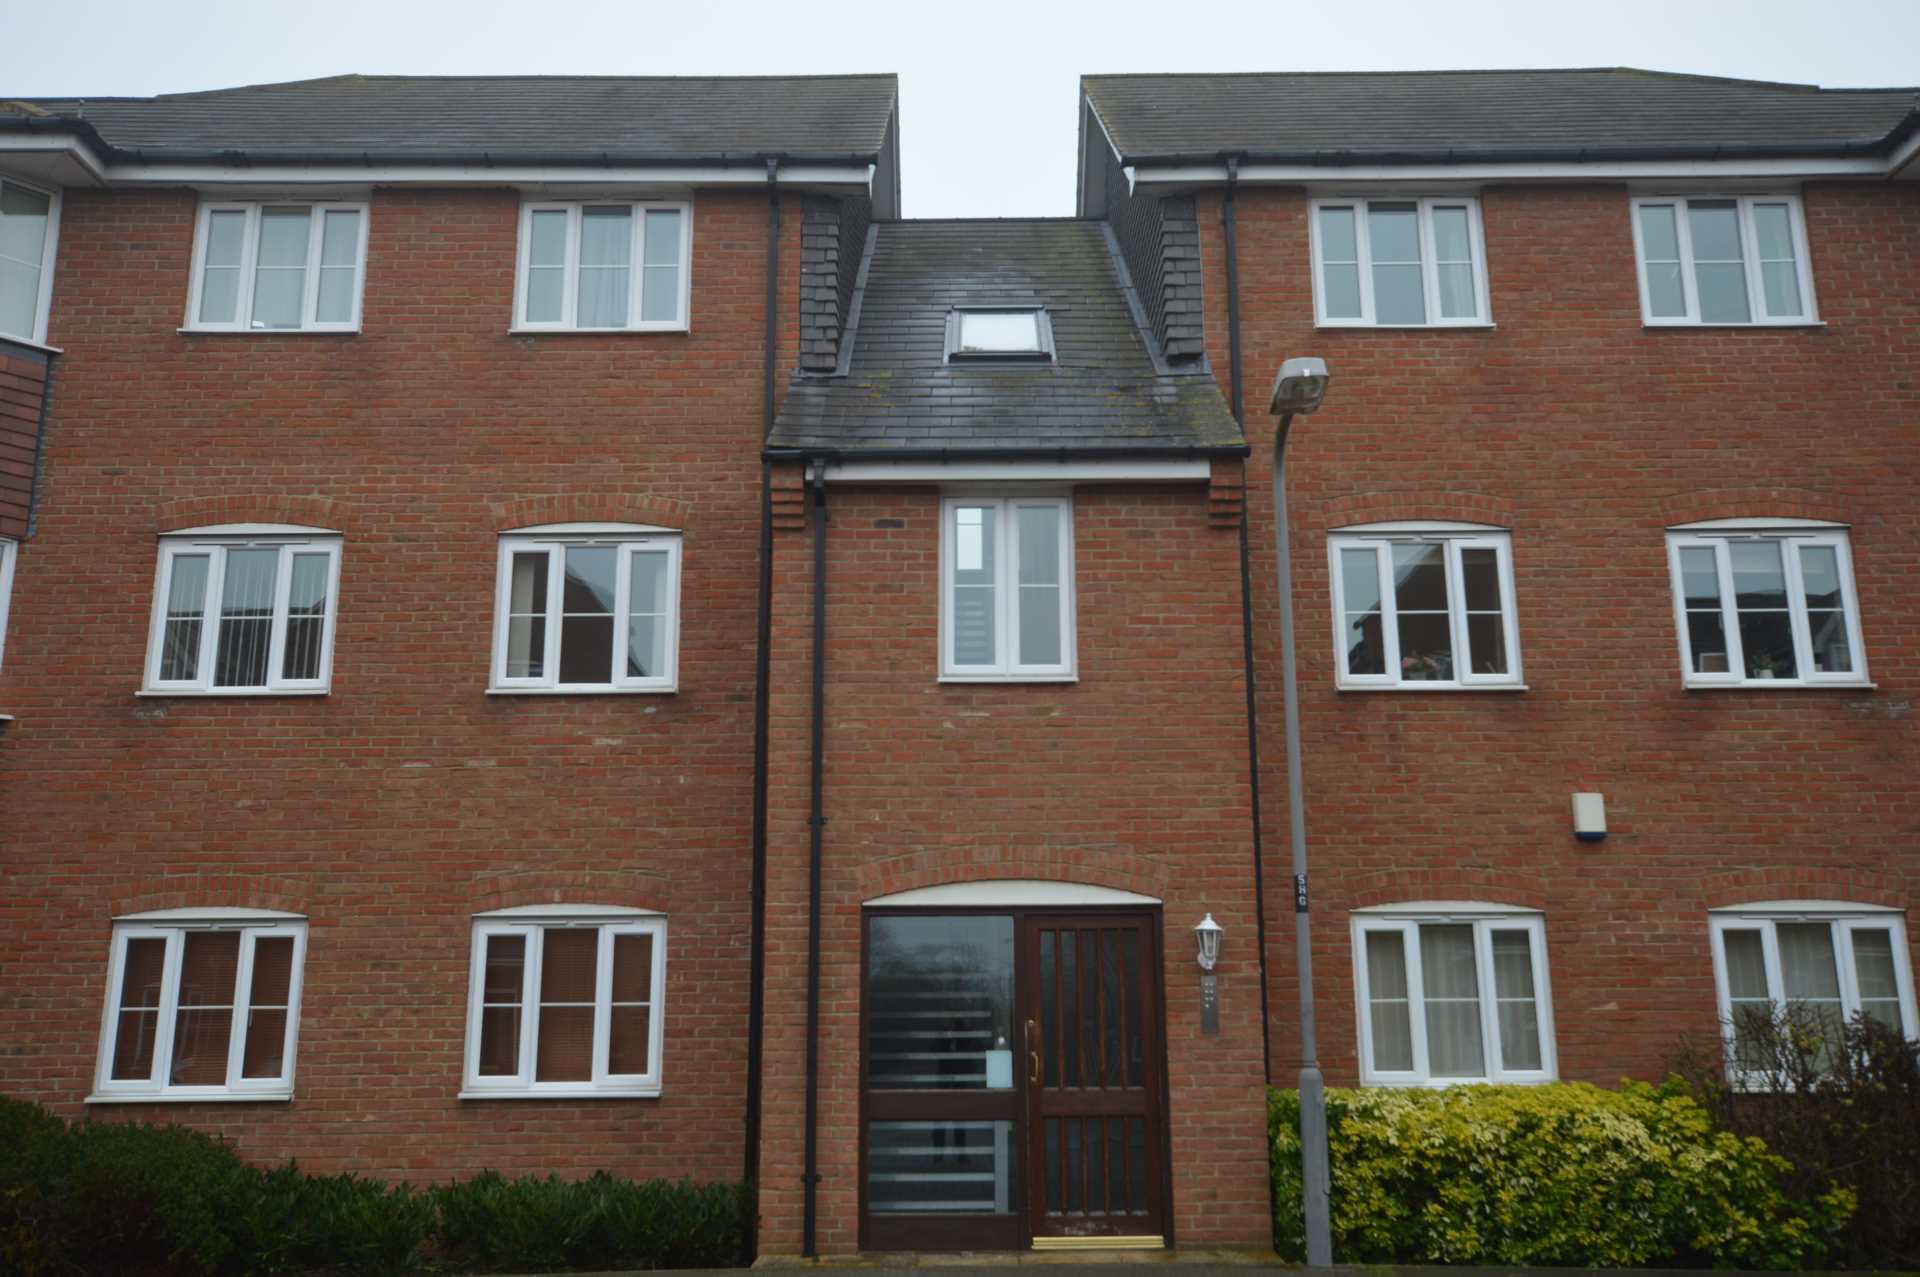 Hopton Grove, Newport Pagnell, Image 1